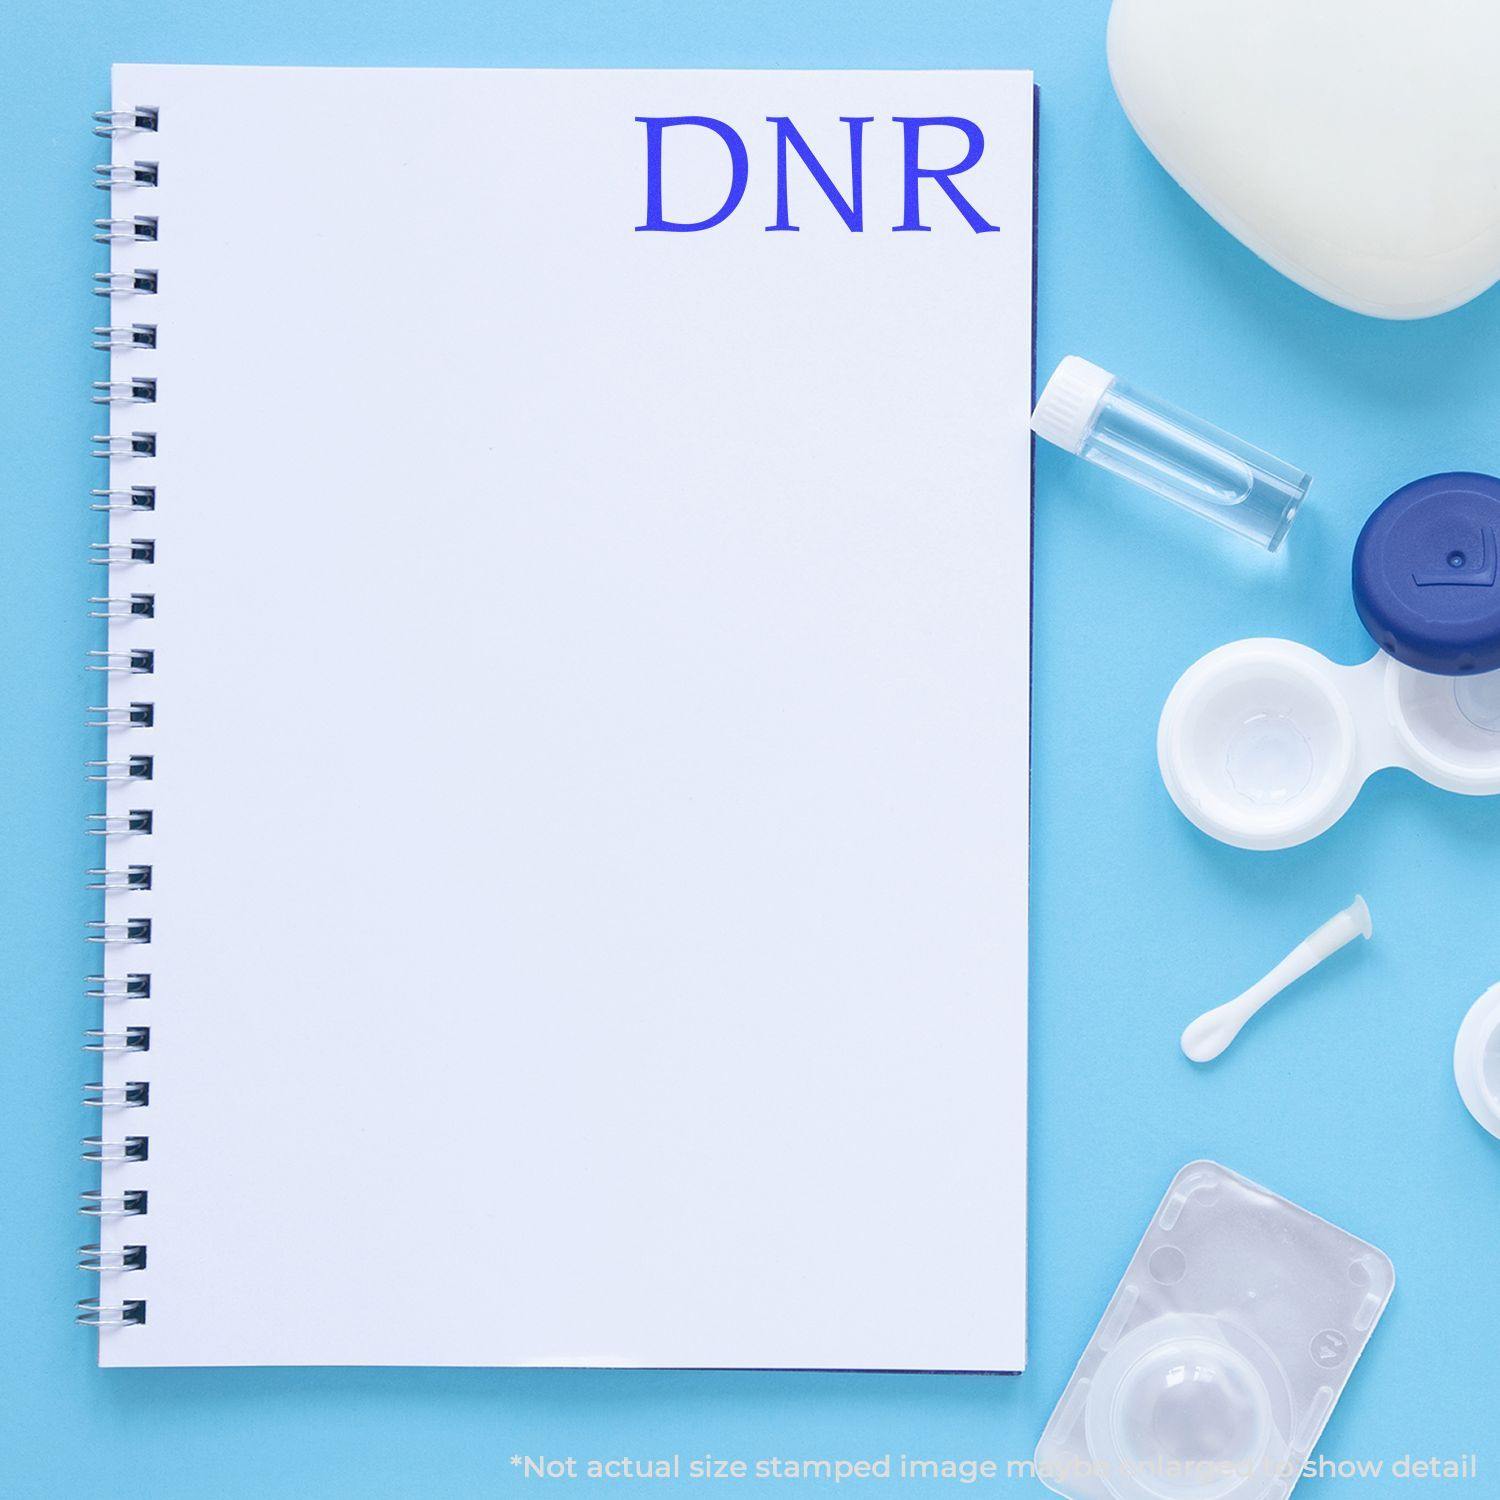 A self-inking stamp with a stamped image showing how the text "DNR" is displayed after stamping.